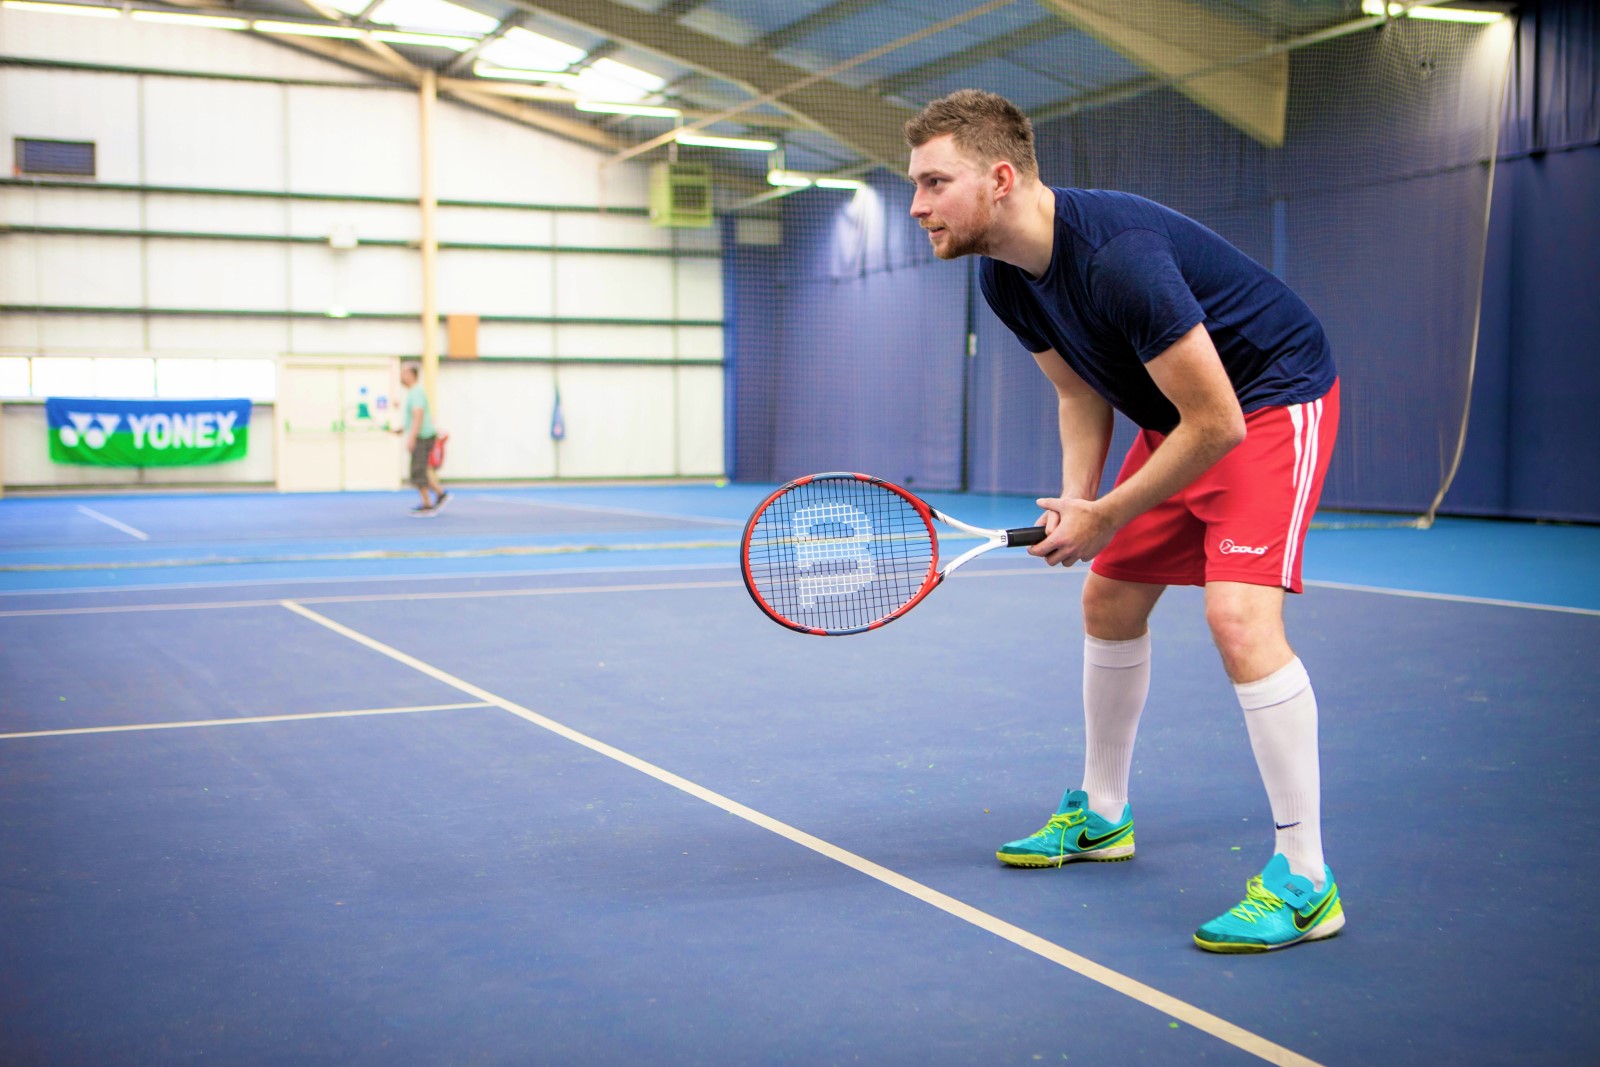 man in red shorts holding a tennis racket.jpg